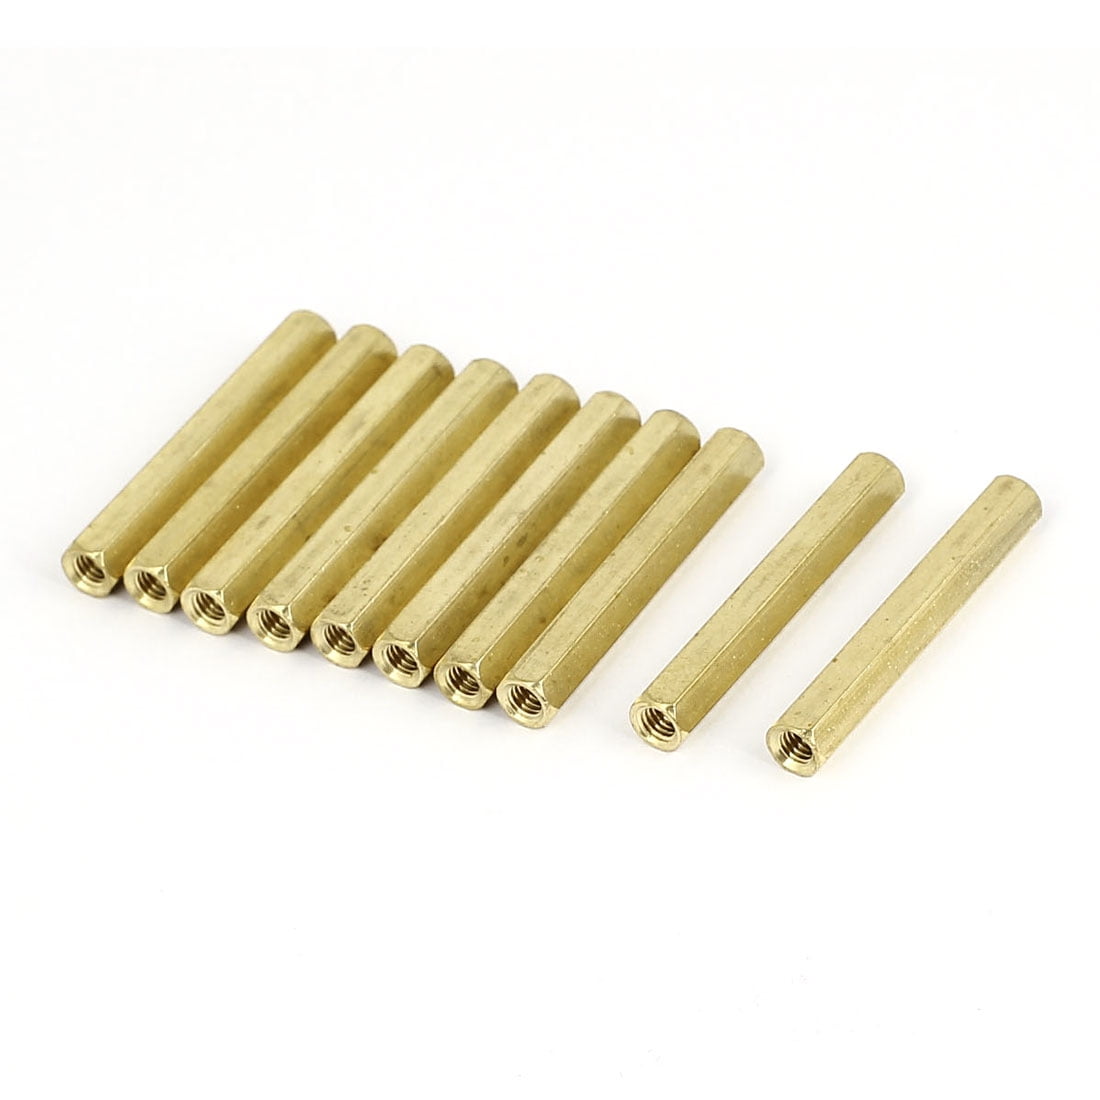 Hex Standoff 0.25 OD Brass 7 Length, Pack of 1 Female #4-40 Screw Size Zinc Plated 